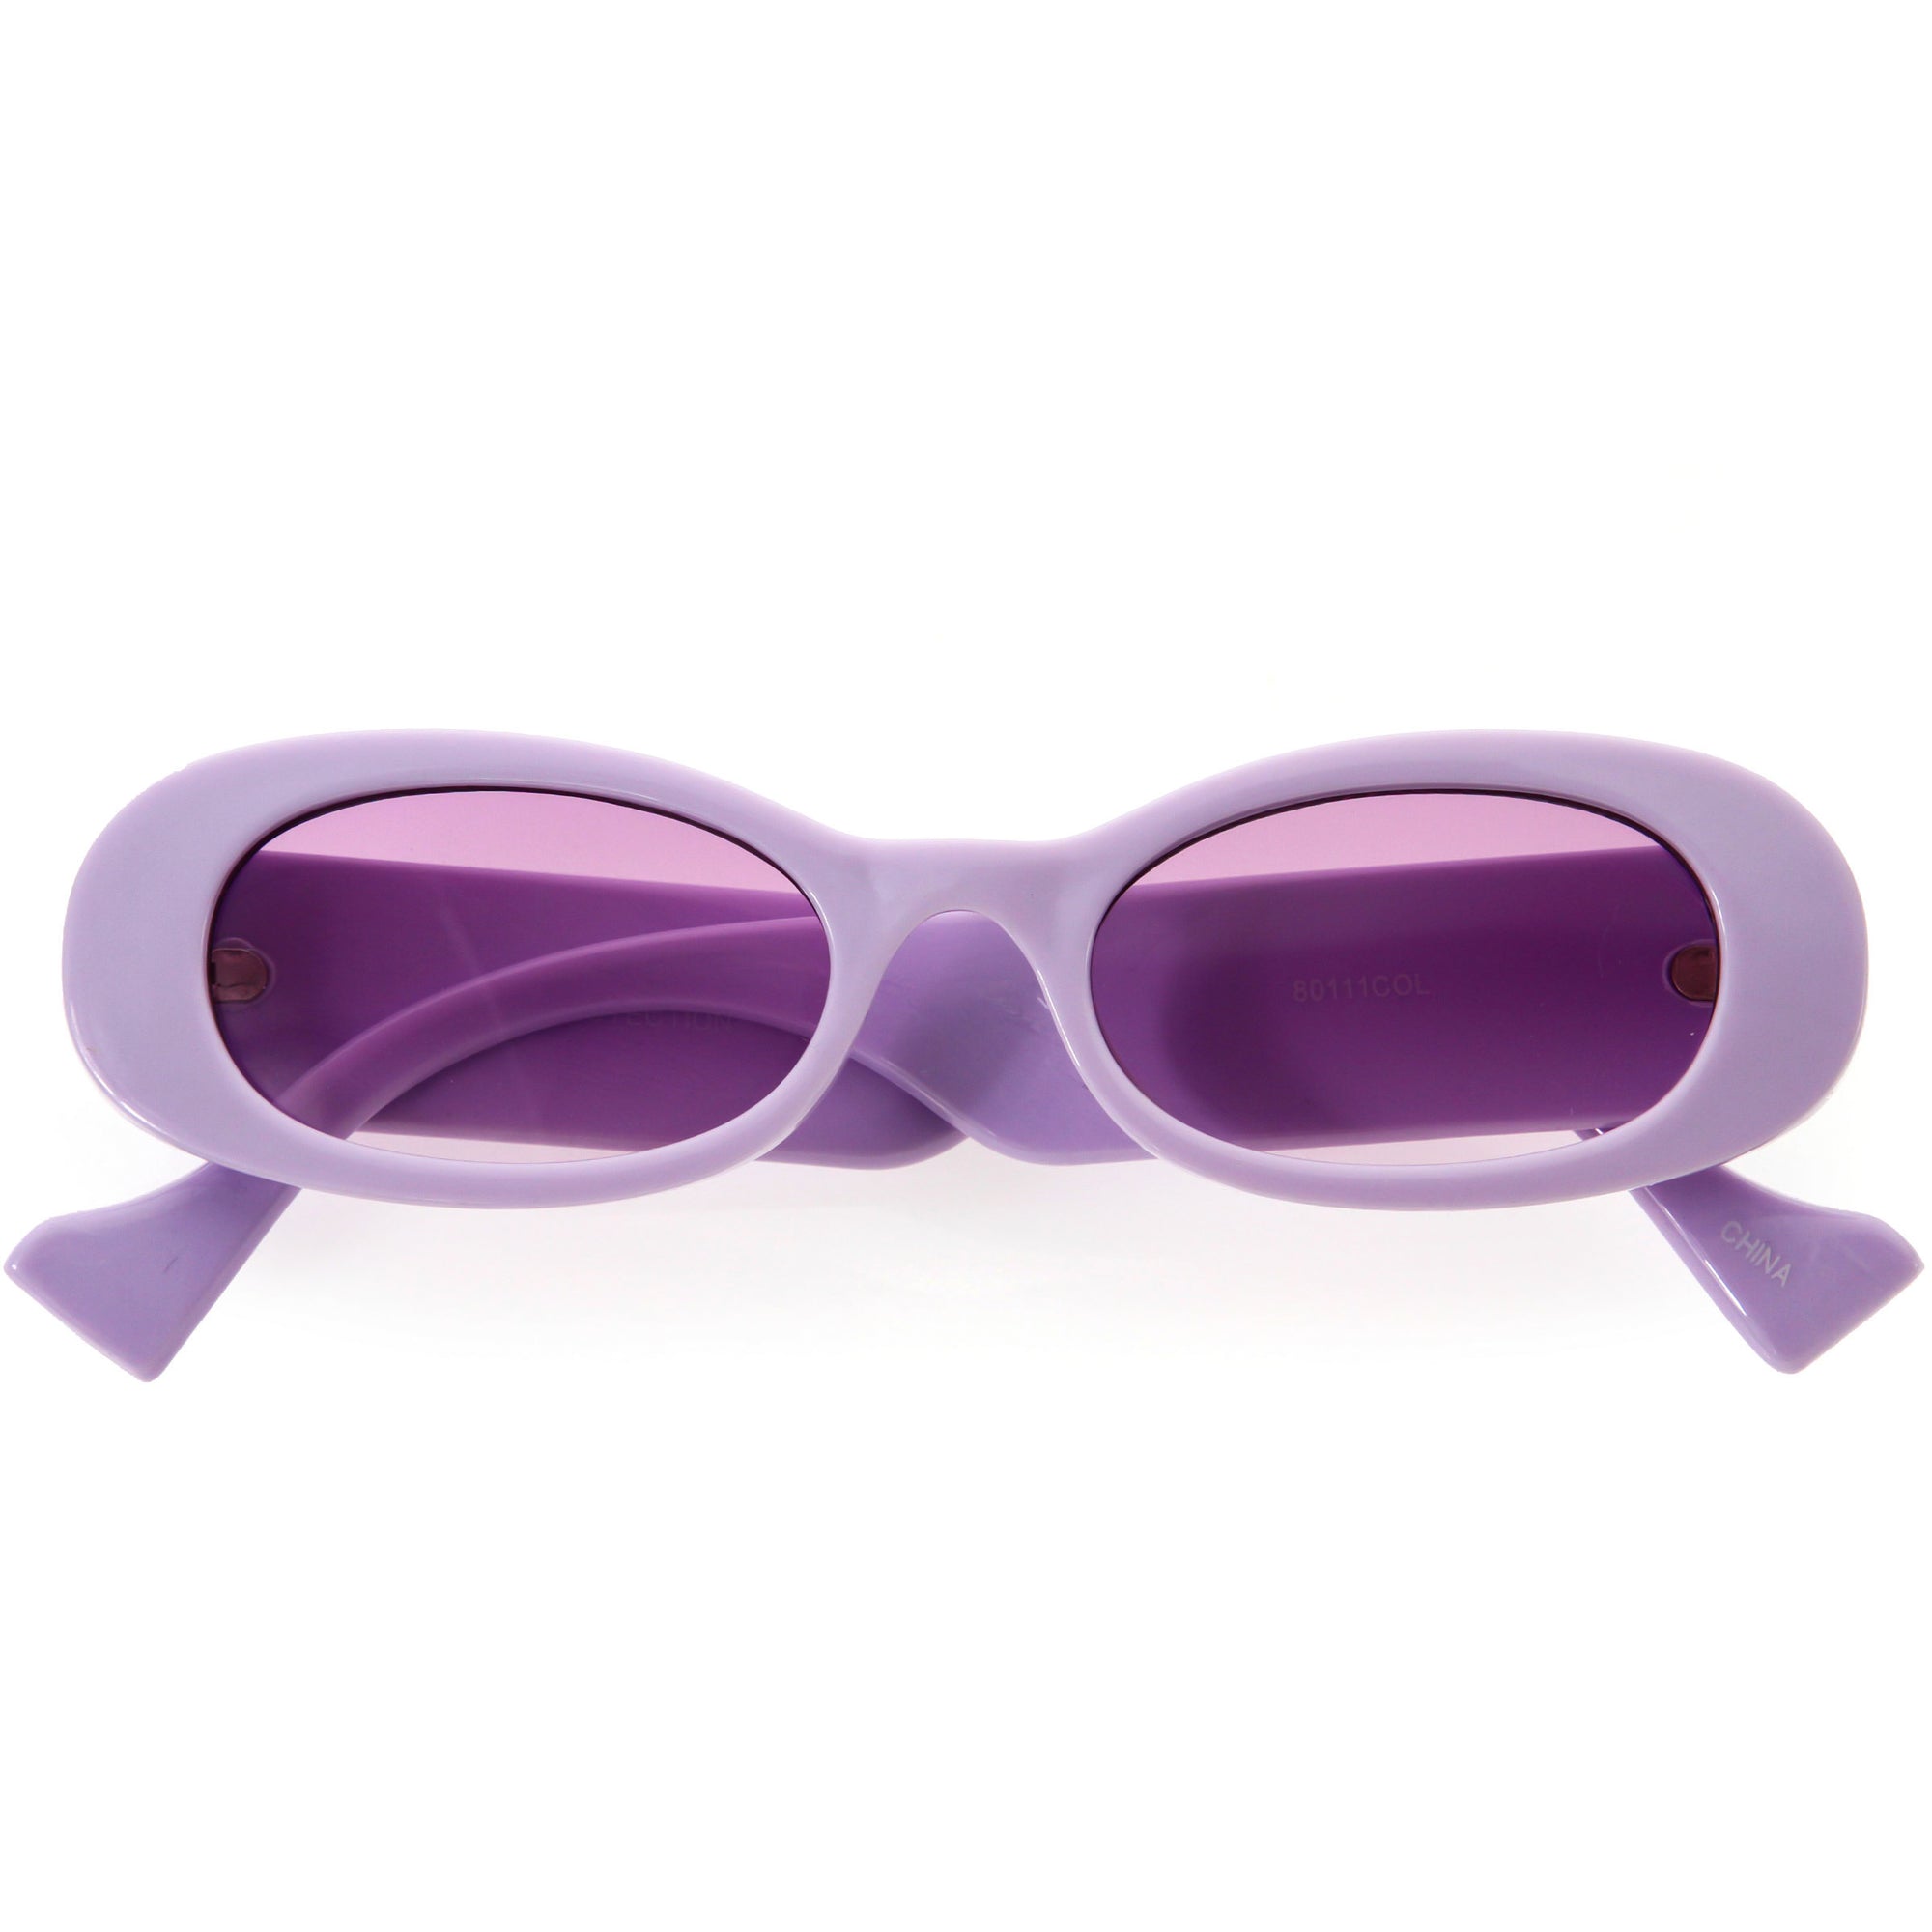 Colorful Pastel Retro Inspired Chunky Oval Sunglasses D296